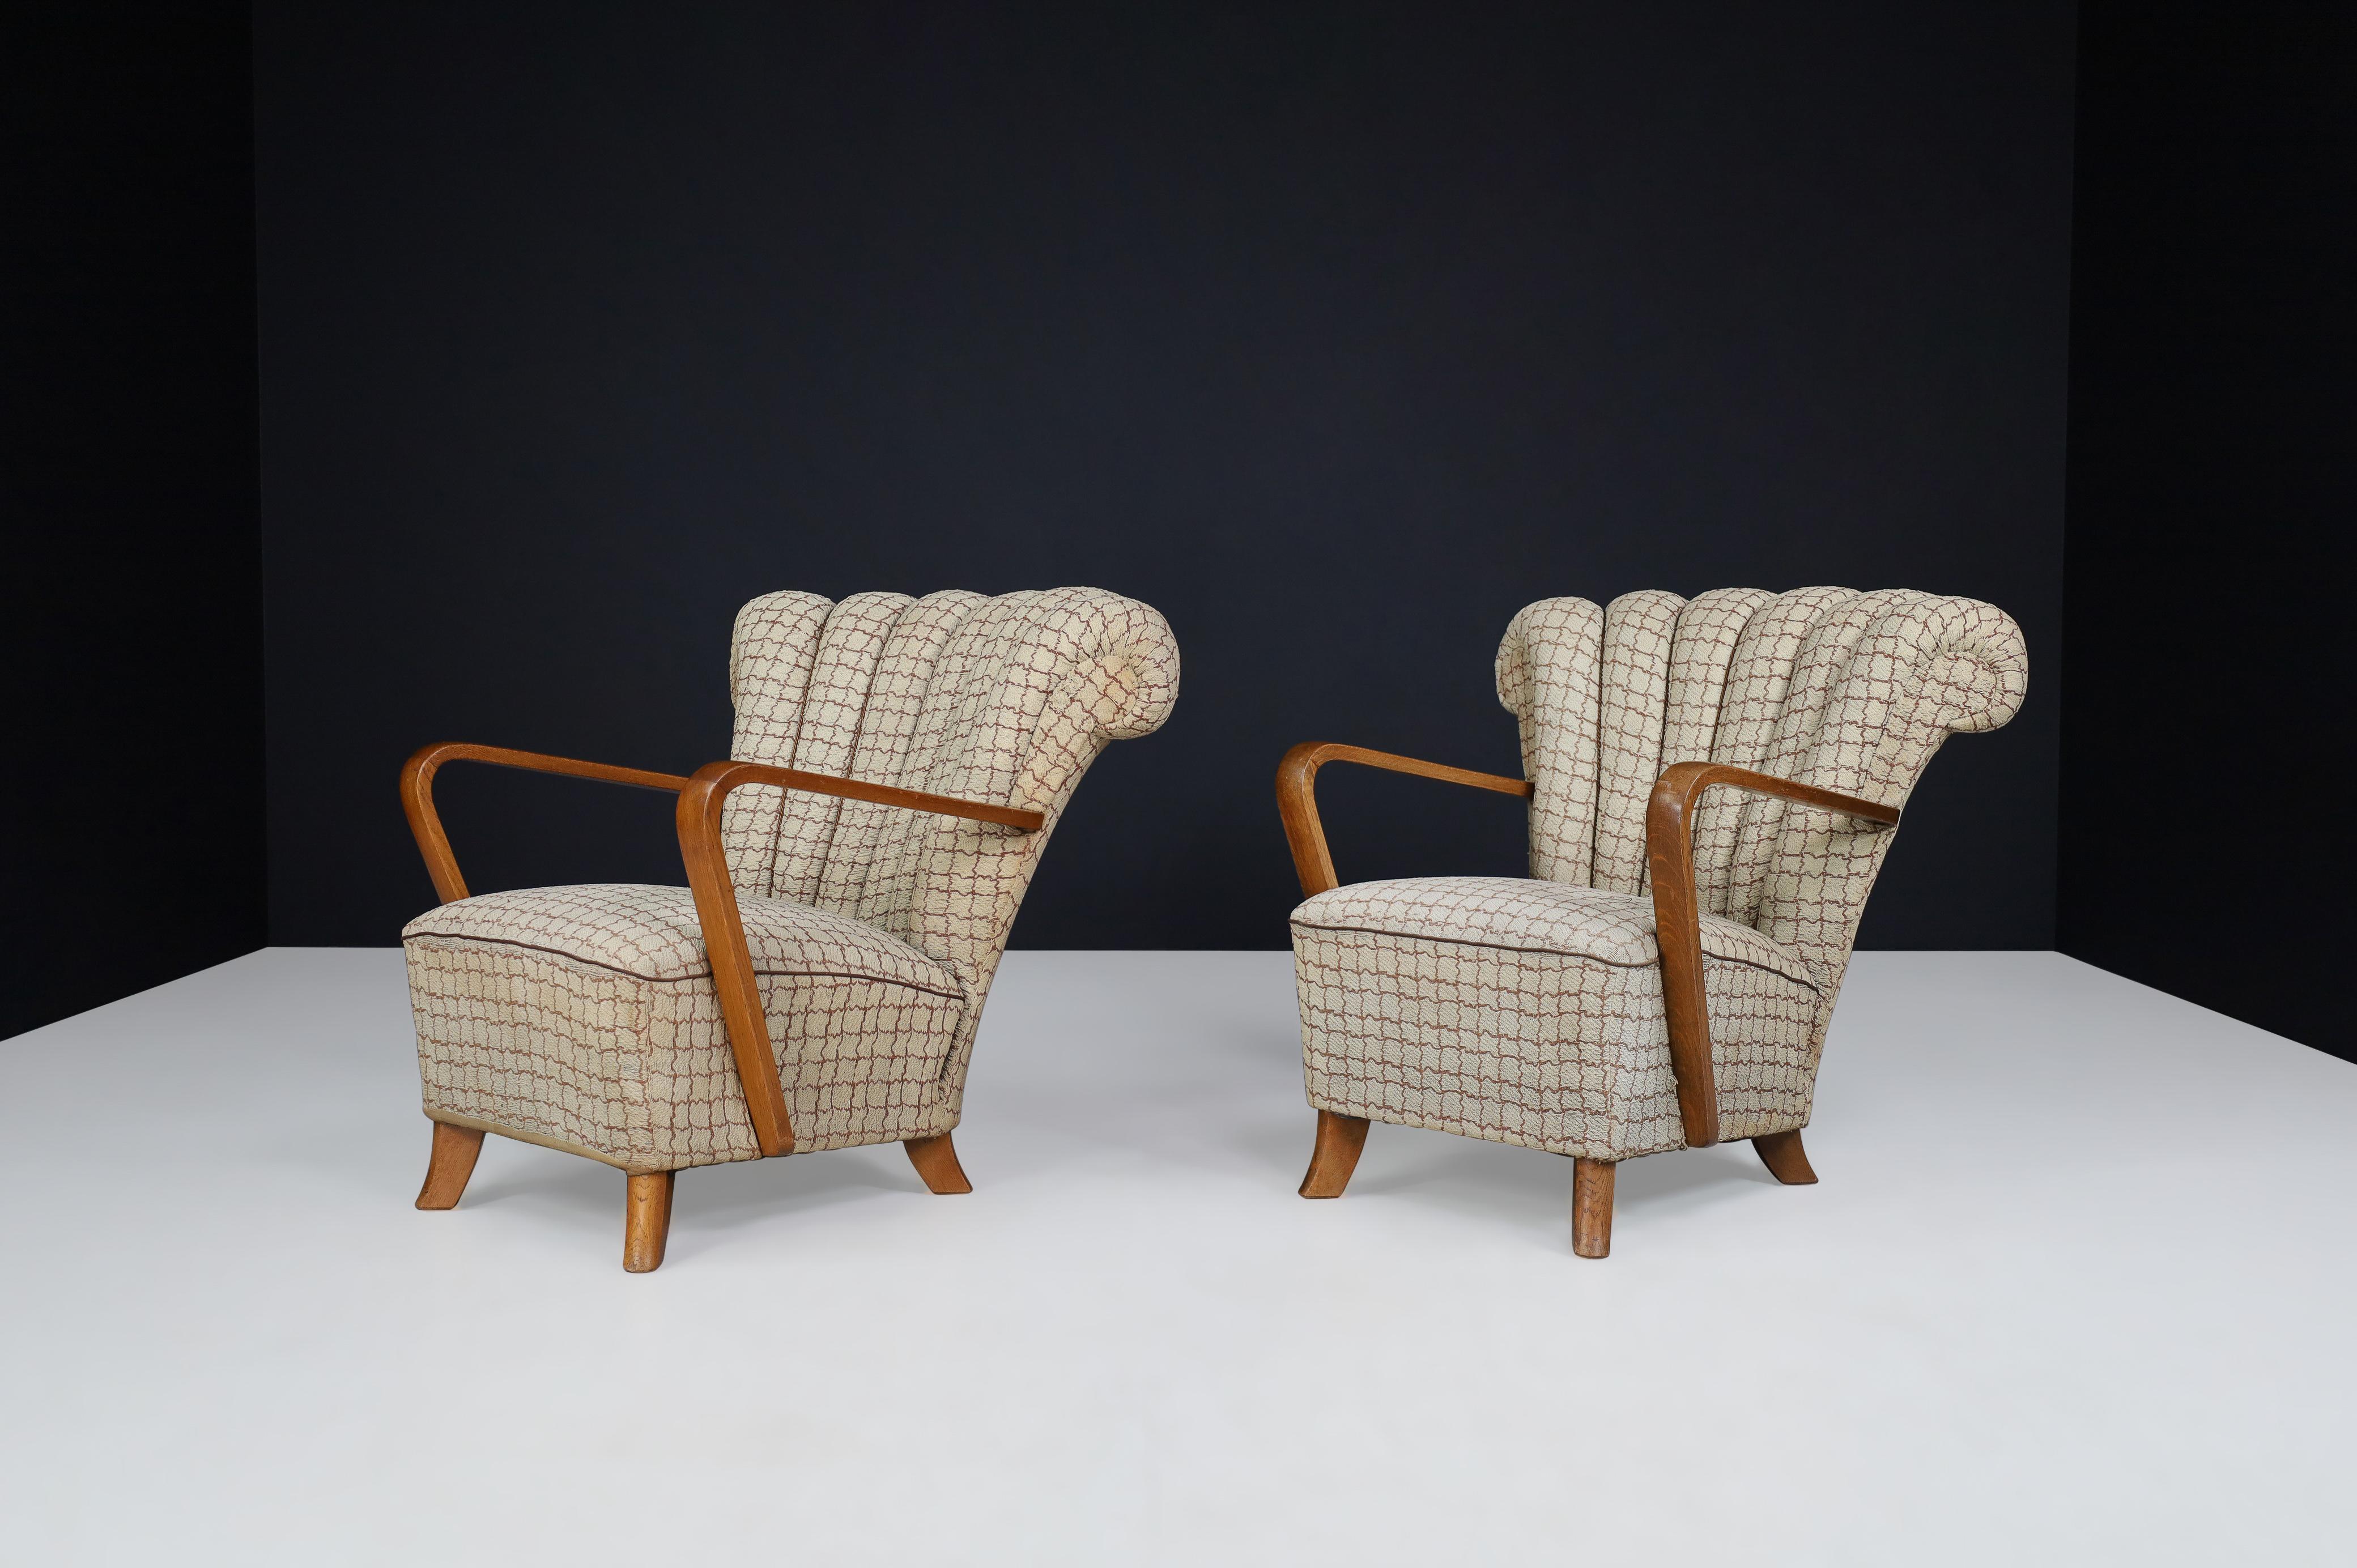 Art Deco Fan-Shaped Armchairs in Bentwood and Original Upholstery, Praque, 1930s In Good Condition For Sale In Almelo, NL